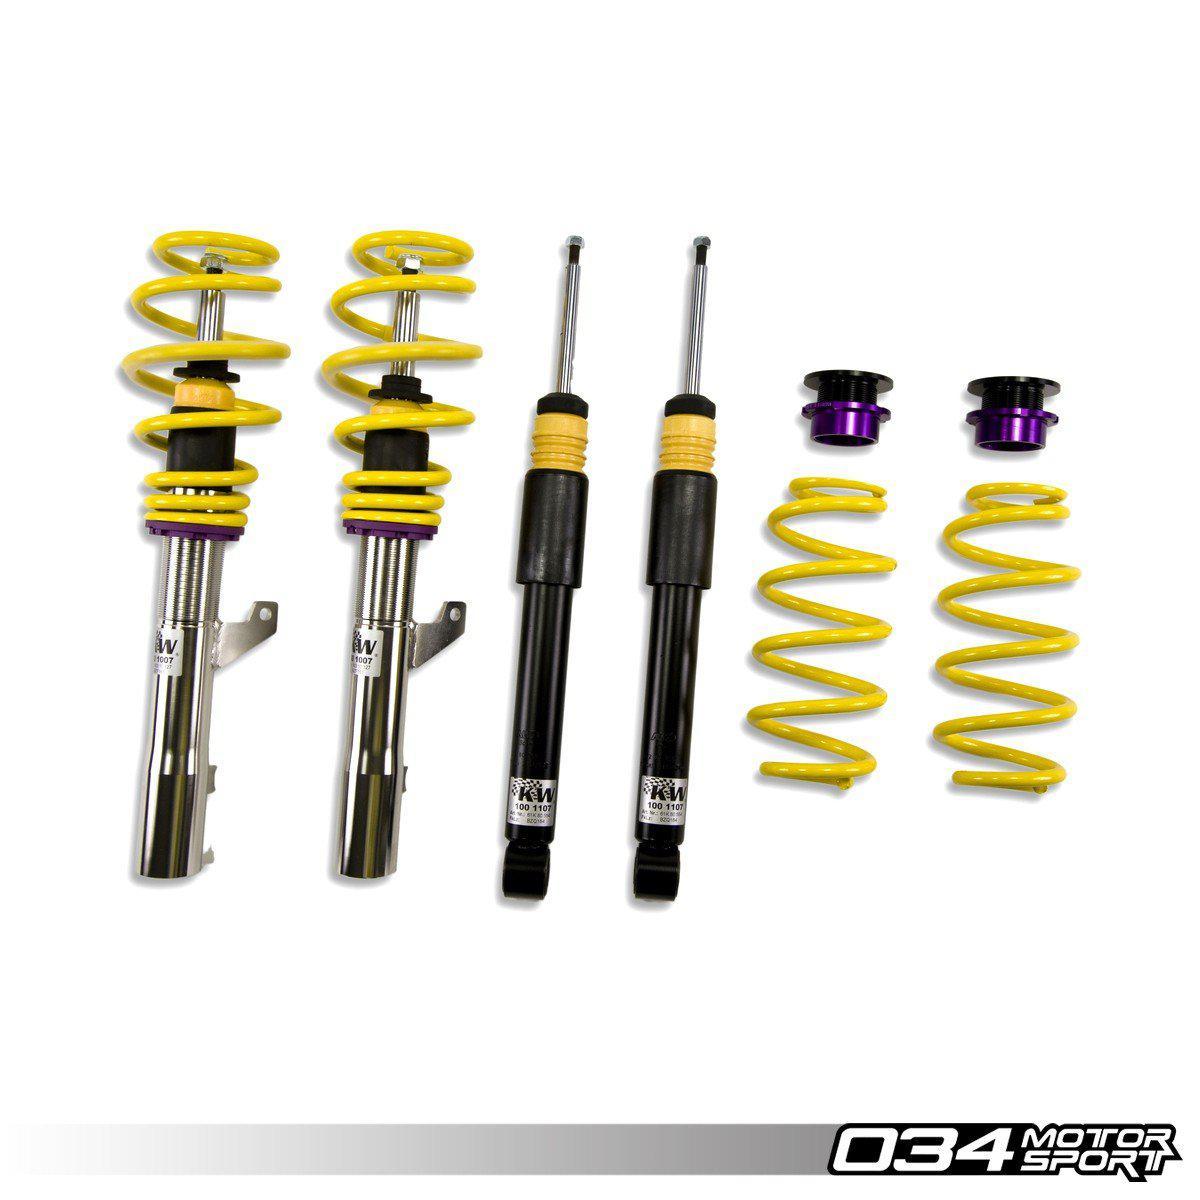 KW Variant 3 Coilover Suspension, Volkswagen Tiguan-A Little Tuning Co